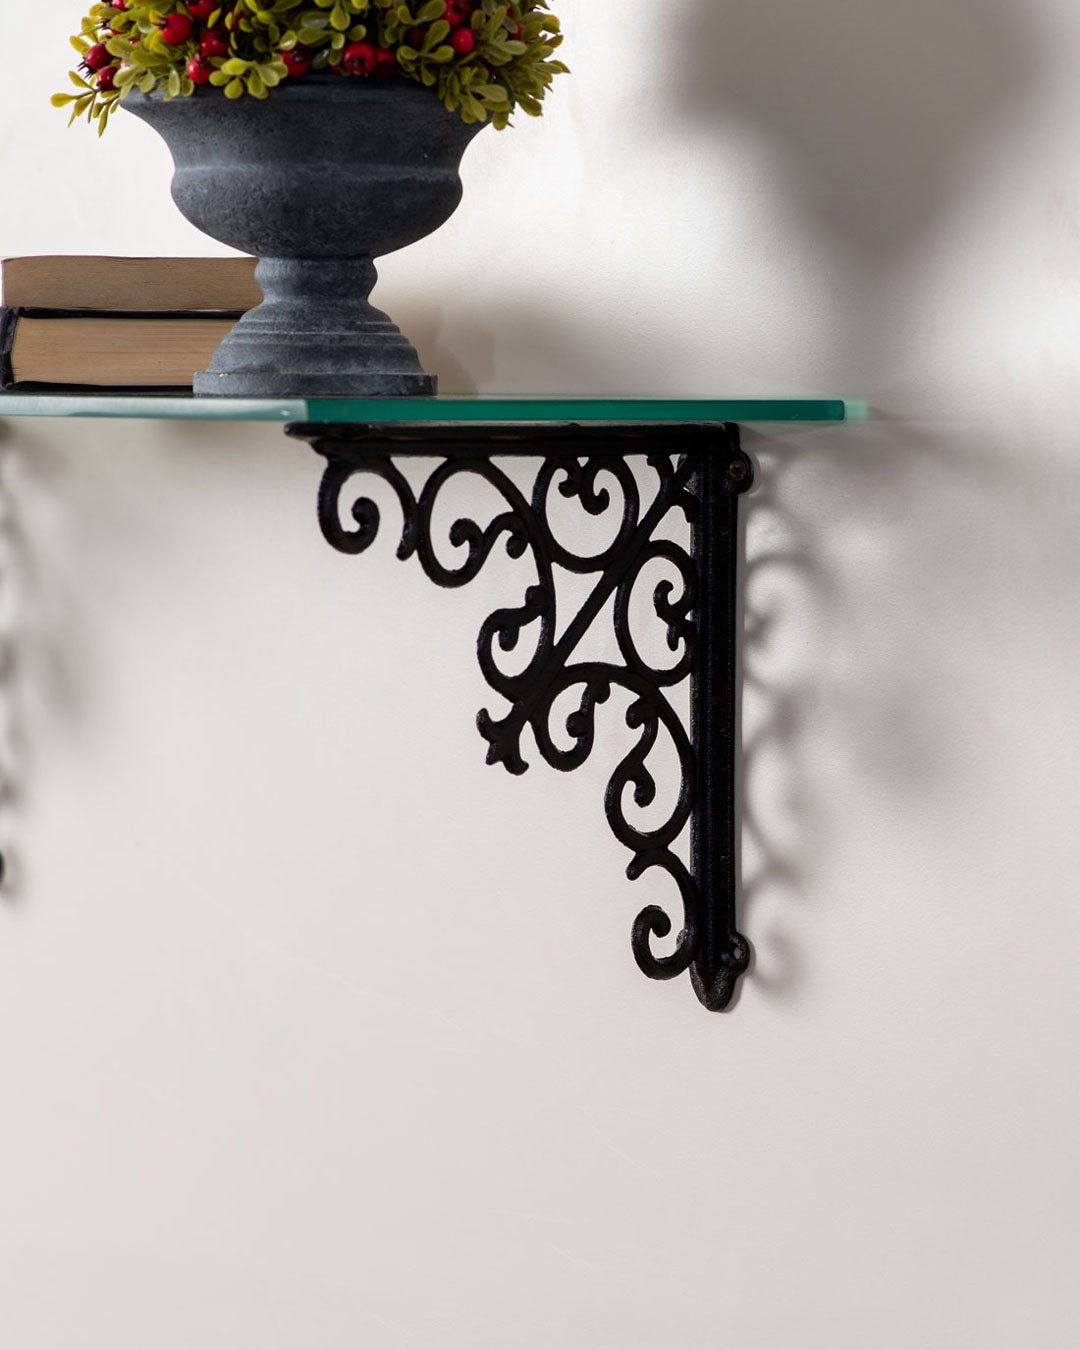 Elegant wall-mounted ornate cast iron shelf with intricate scrollwork for chic home decor.